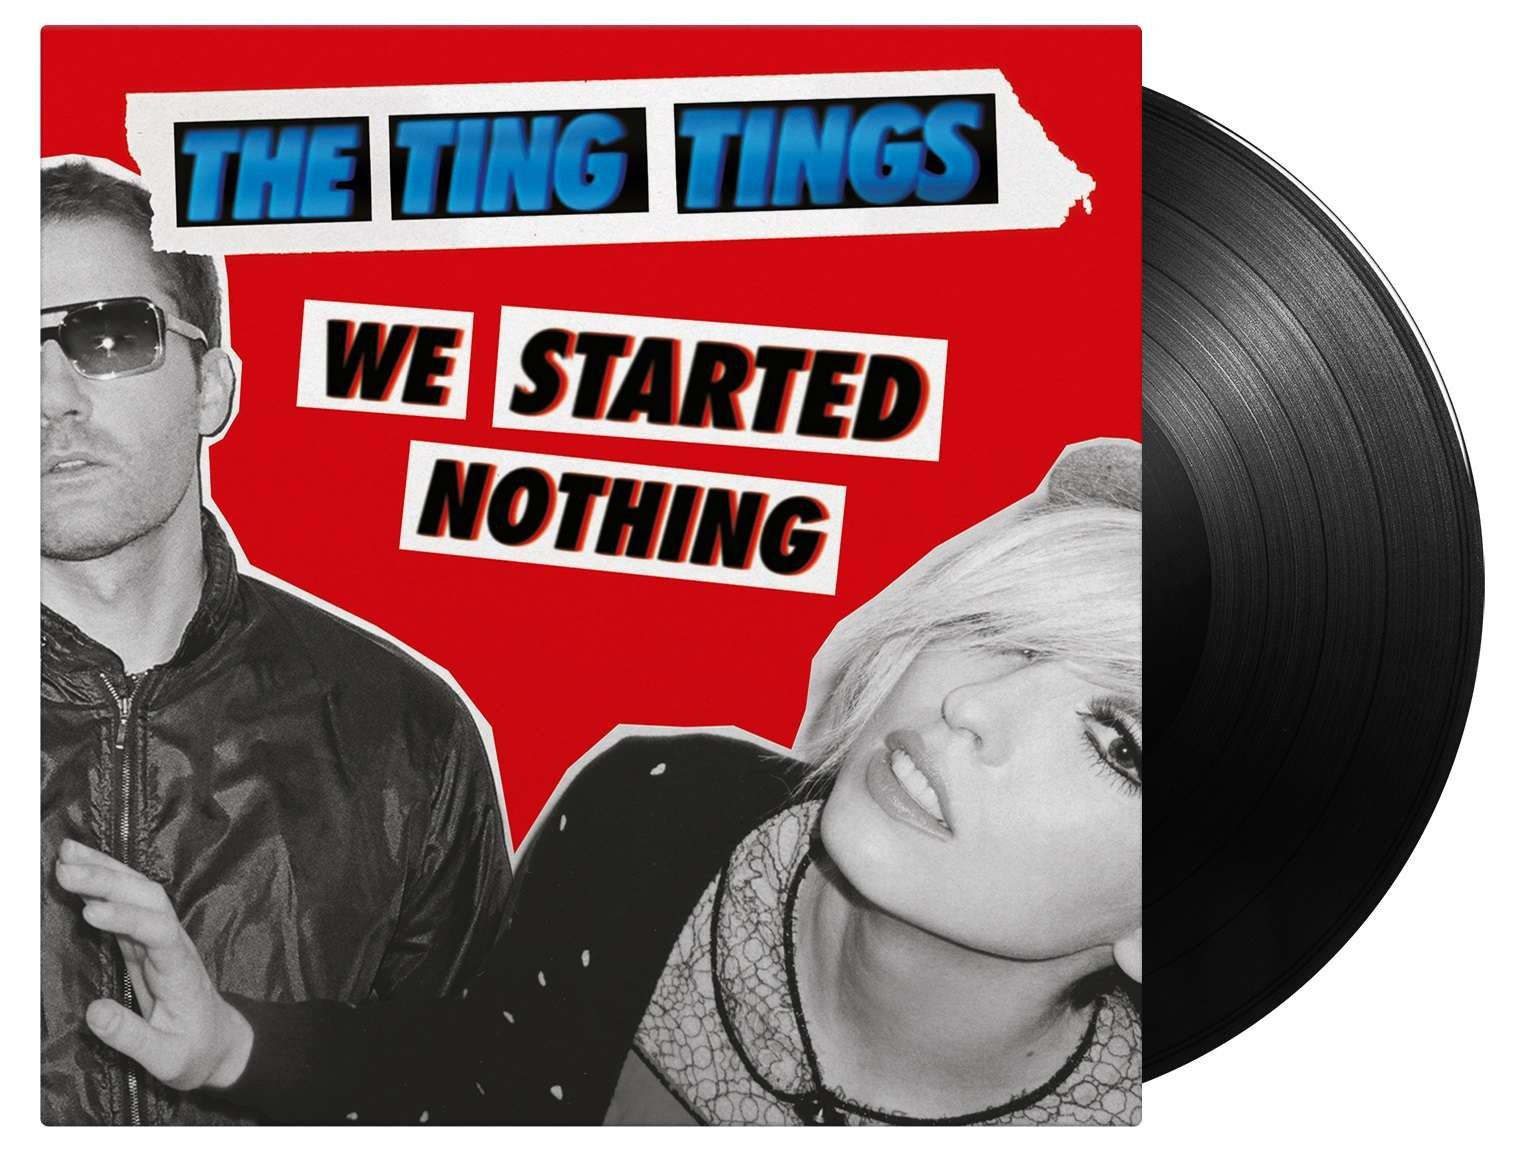 CD Shop - TING TINGS, THE WE STARTED NOTHING